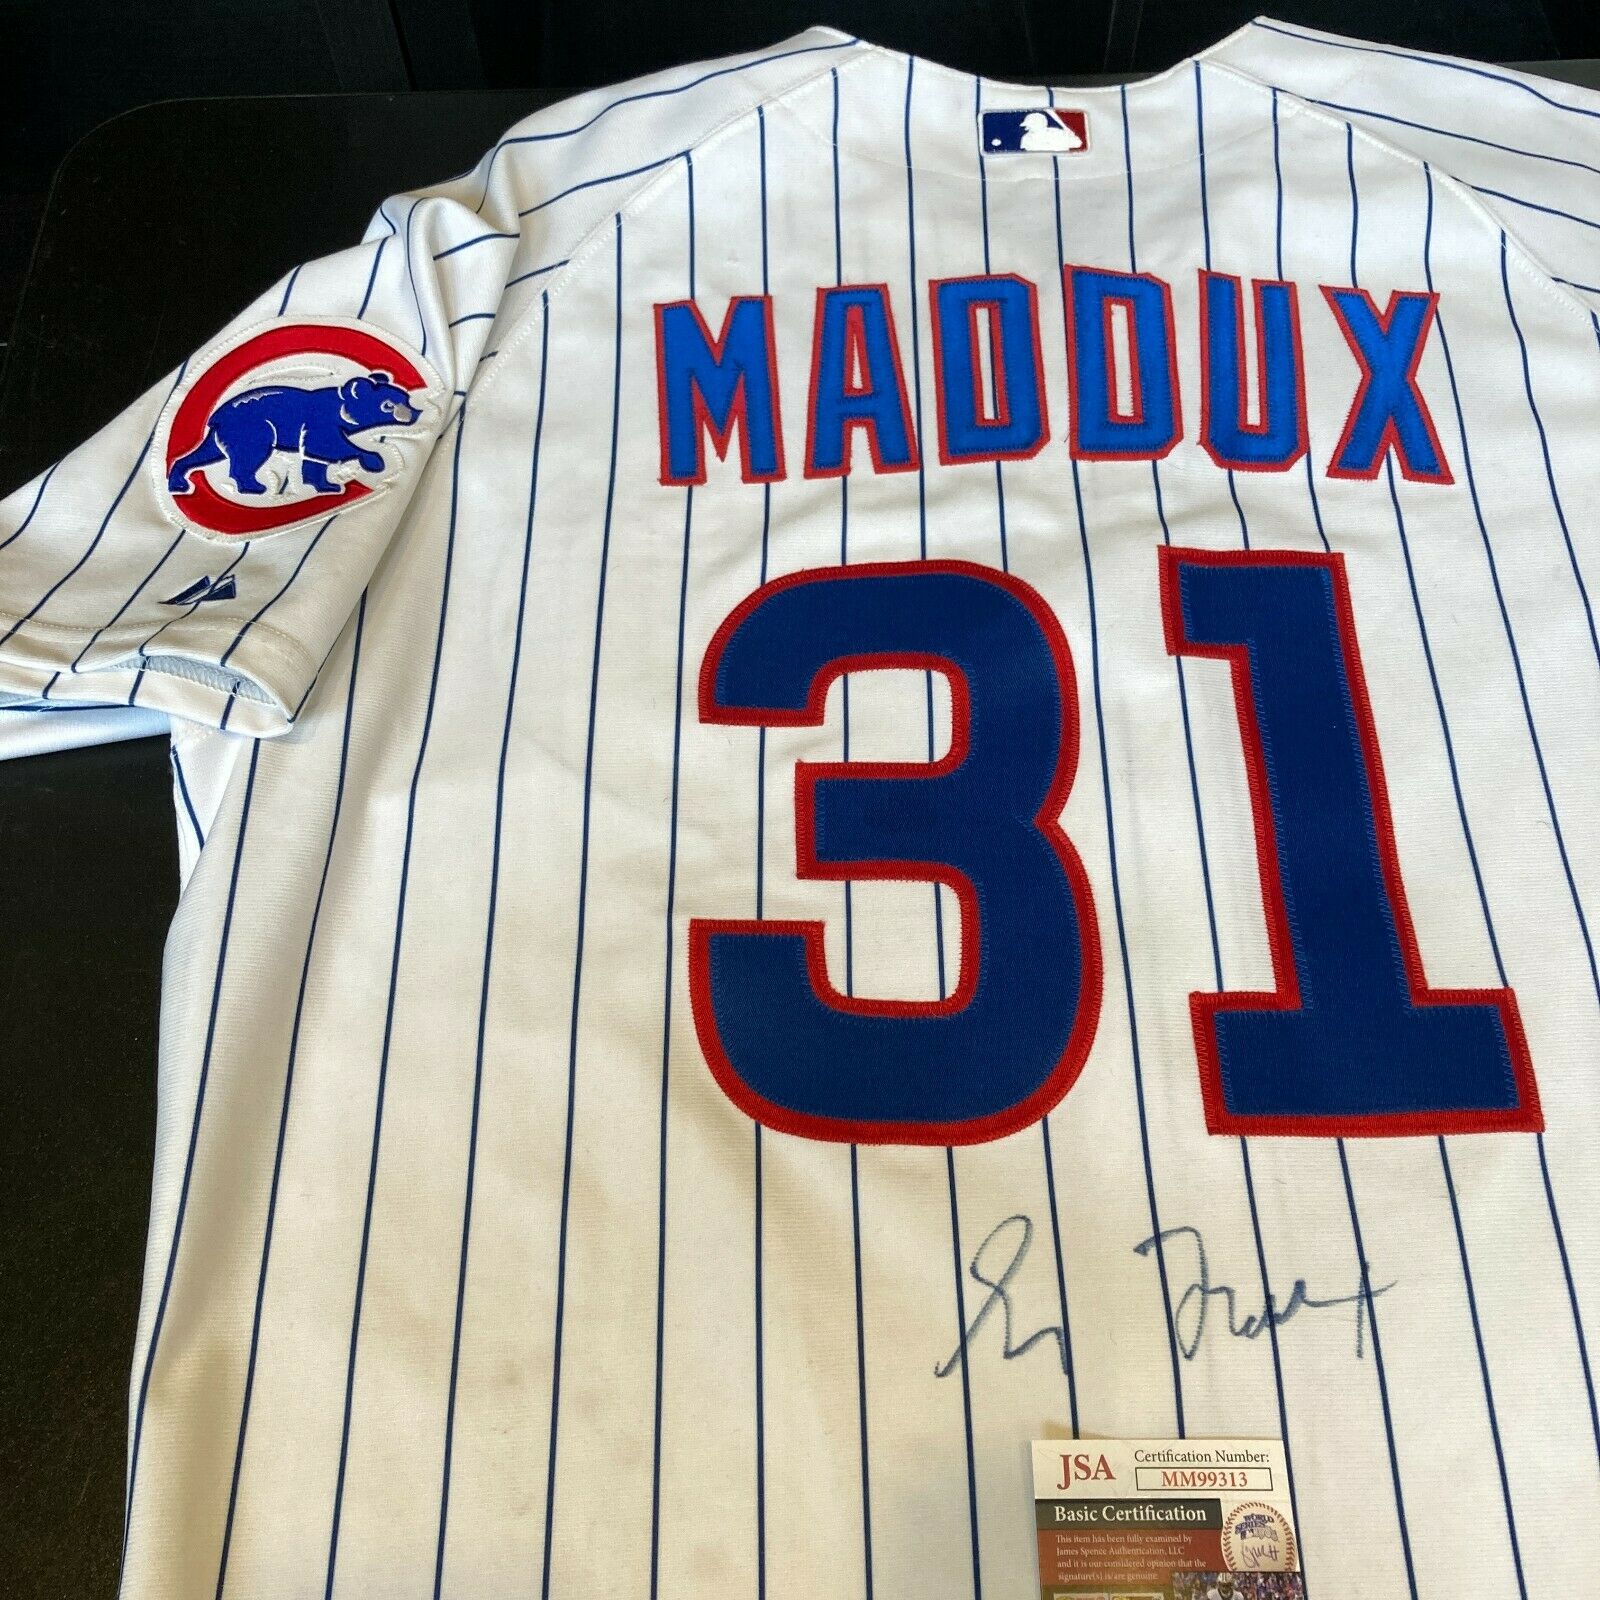 Maddux Authentic Jersey